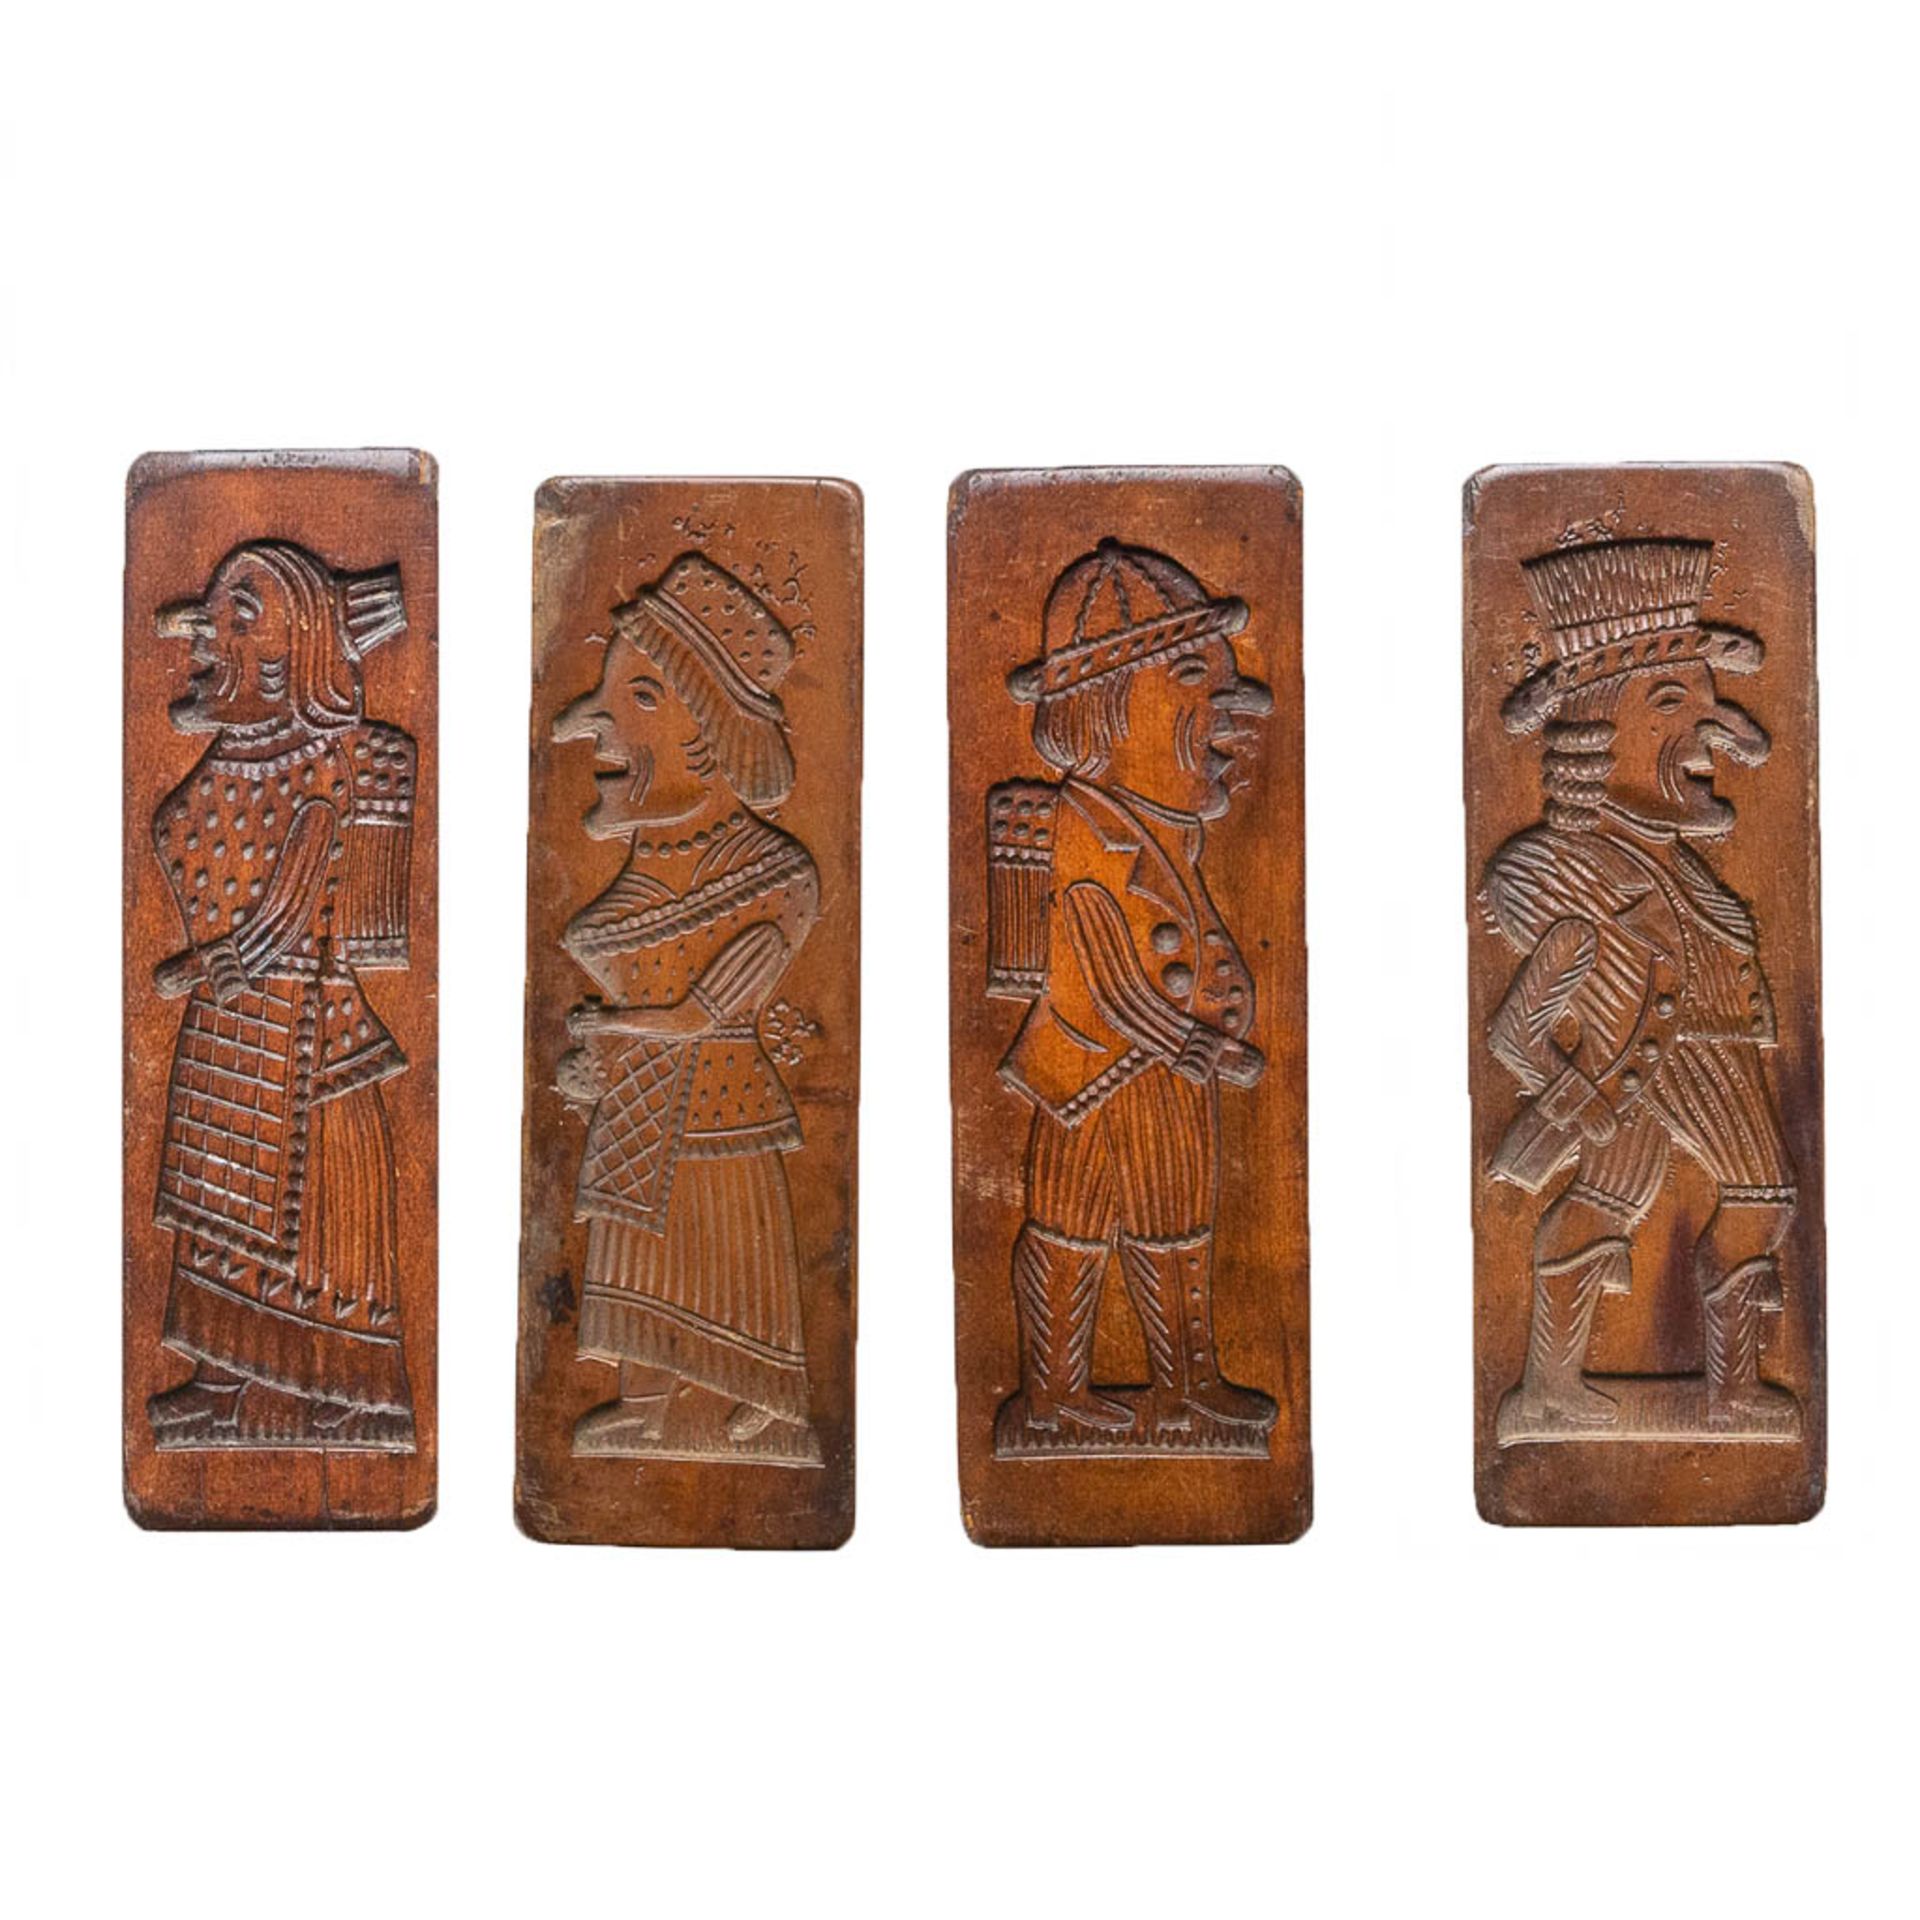 A collection of 4 wood cookies or gingerbread moulds/molds. - Image 3 of 9